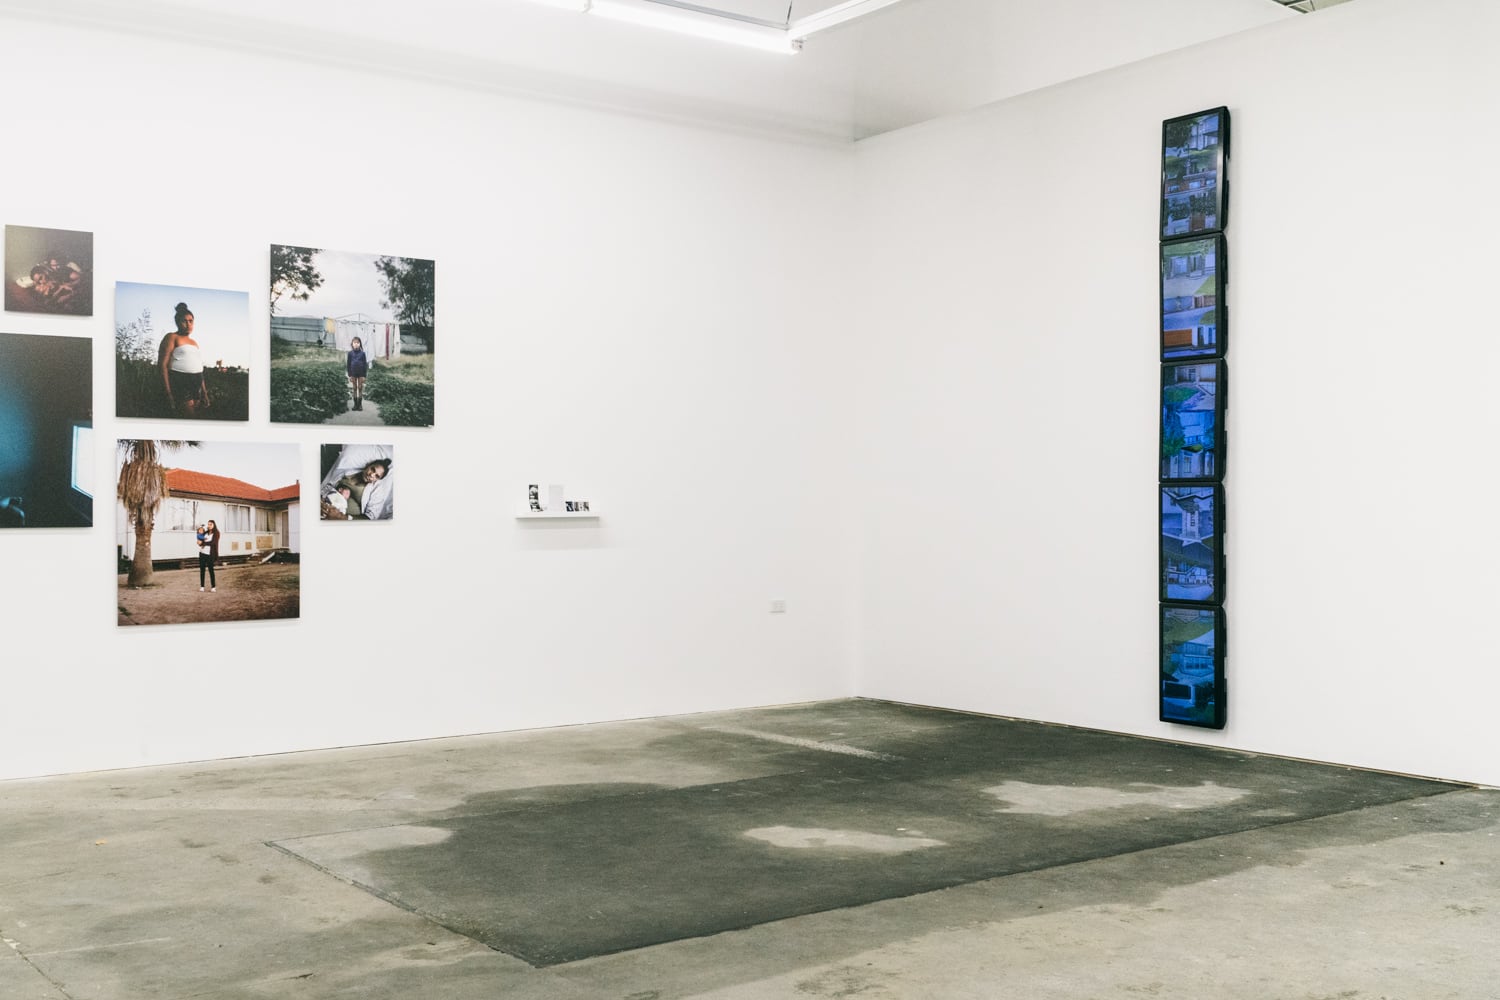 Installation view featuring Daniel McKewen, 'Climbing' 2018 and Raphaela Rosella, ‘You’ll know it when you feel it’ series, 2015-17. Courtesy Daniel McKewen, Raphaela Rosella and Outer Space ARI. Project supported by Beyond Empathy and the Photographic Museum of Humanity. Copyright Charlie Hillhouse, 2018.